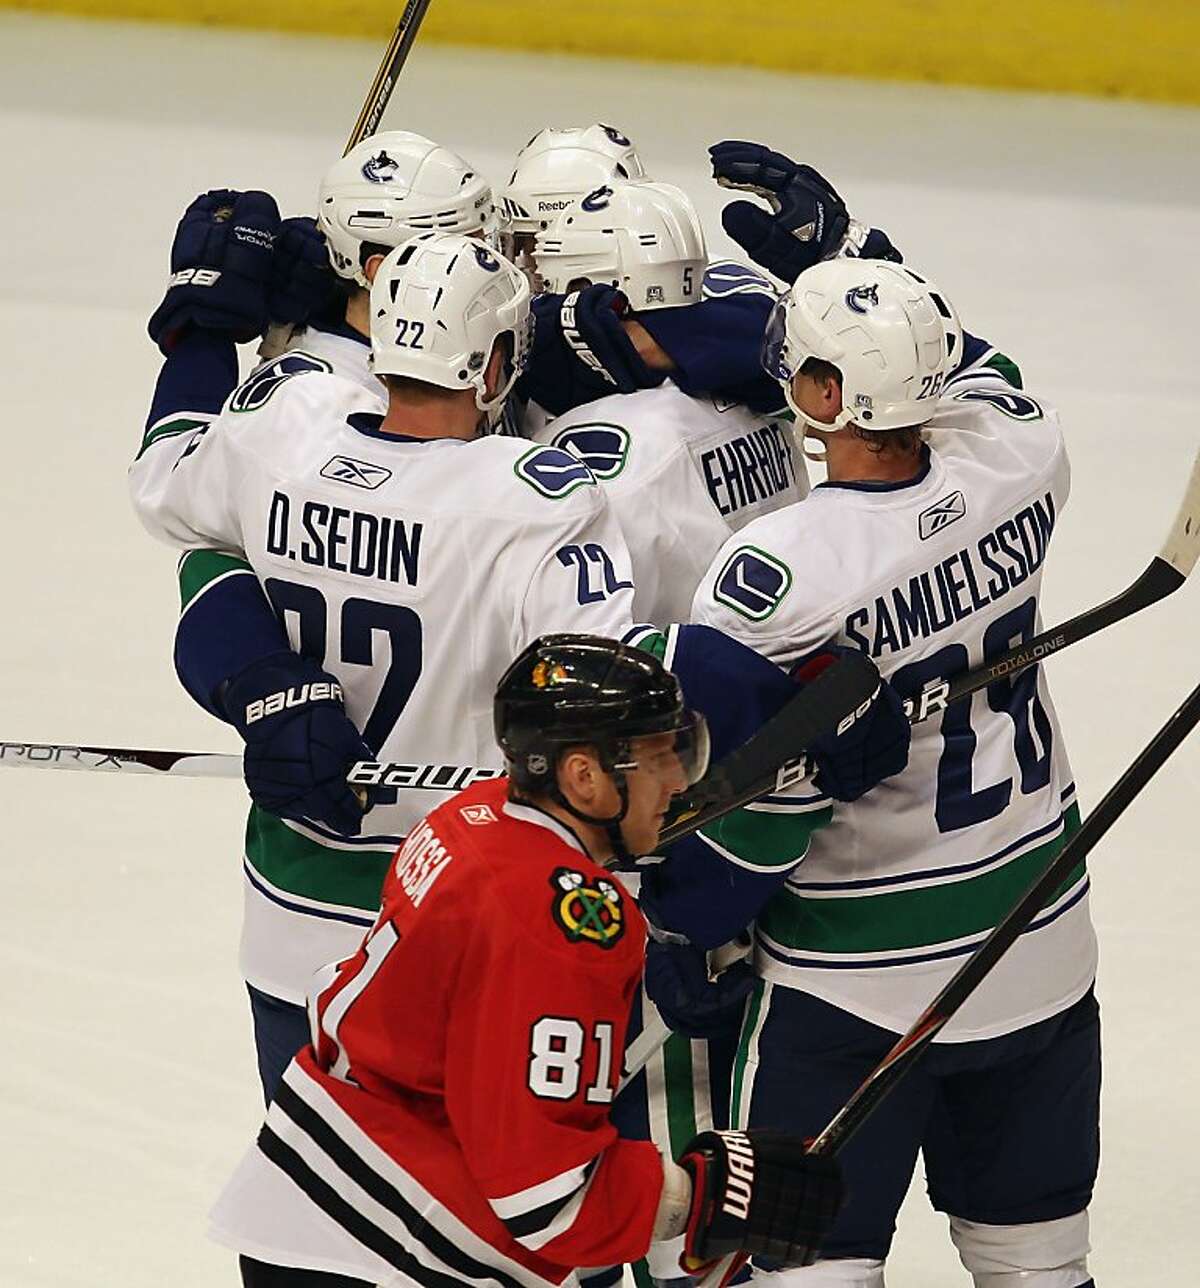 CHICAGO, IL - APRIL 17: Members of the Vancouver Canucks including Daniel Sedin #22 and Mikael Samuelsson #26 celebrate a 2nd period goal by Christian Ehrhoff #5 (center) as Marian Hossa #81 of the Chicago Blackhawks skates off of the ice in Game Three ofthe Western Conference Quarterfinals during the 2011 NHL Stanley Cup Playoffs at the United Center on April 17, 2011 in Chicago, Illinois.